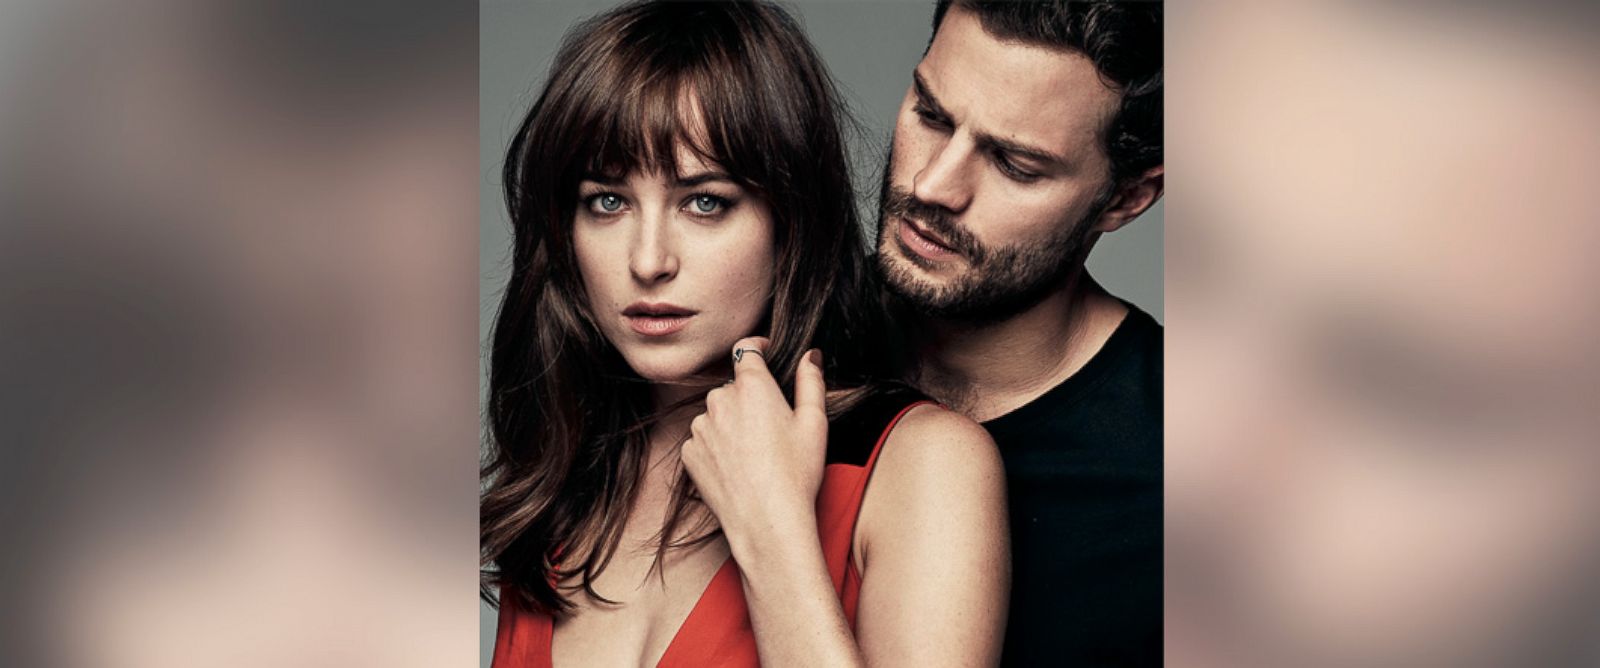 Jamie Dornan And Dakota Johnson On Infamous Red Room In Fifty Shades Of Grey Abc News 